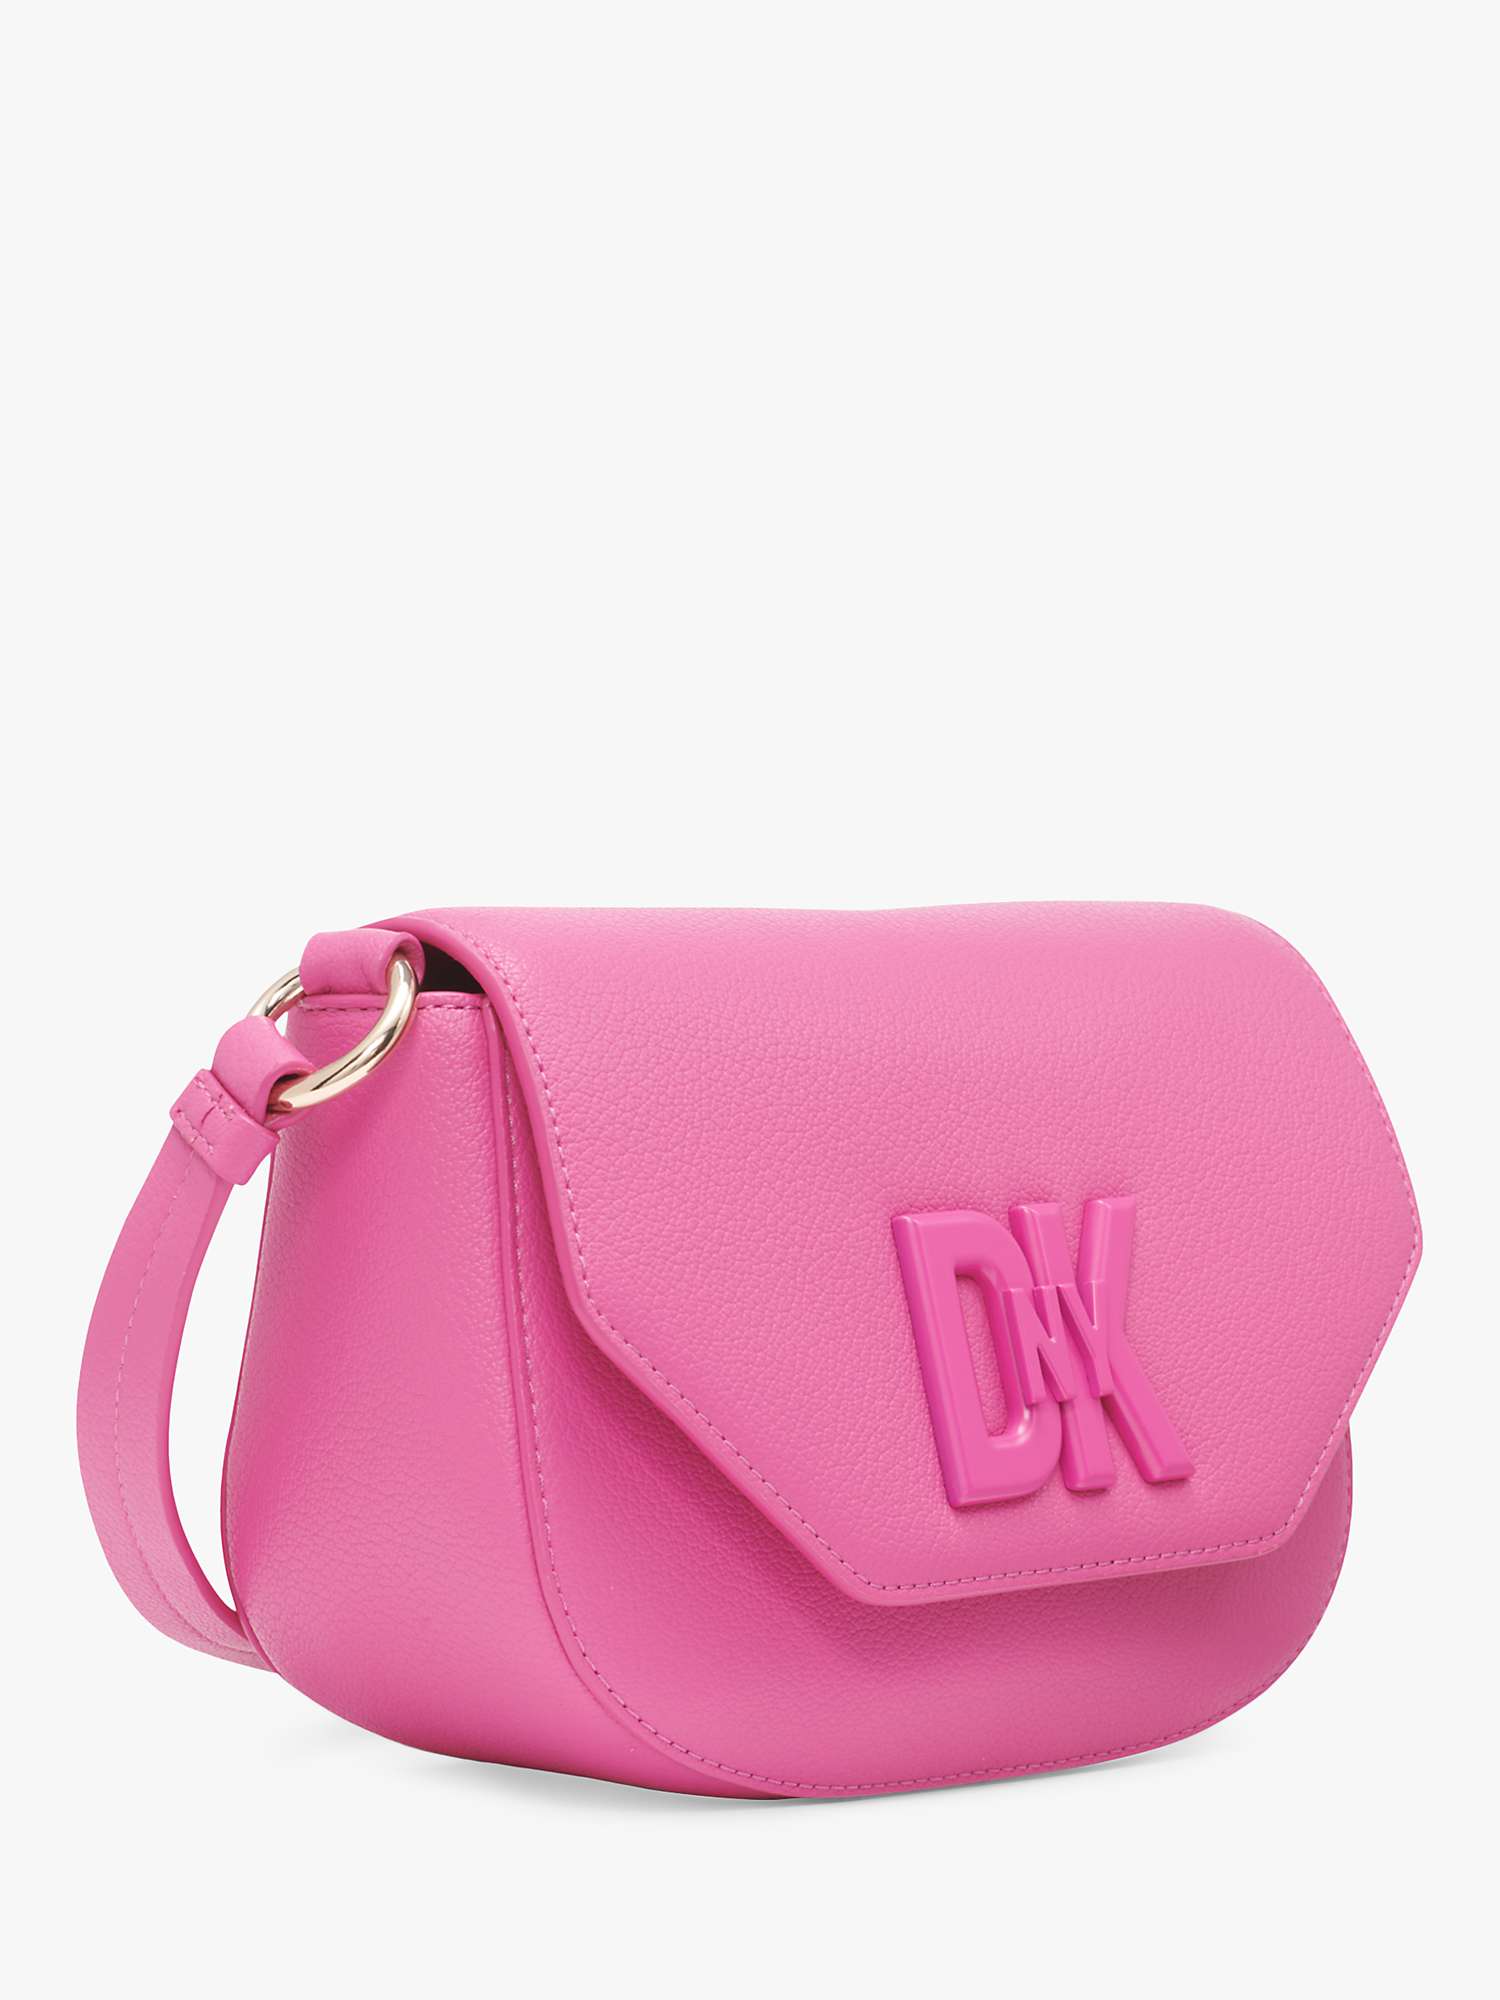 Buy DKNY 7th Avenue Leather Cross Body Bag, Wisteria Online at johnlewis.com